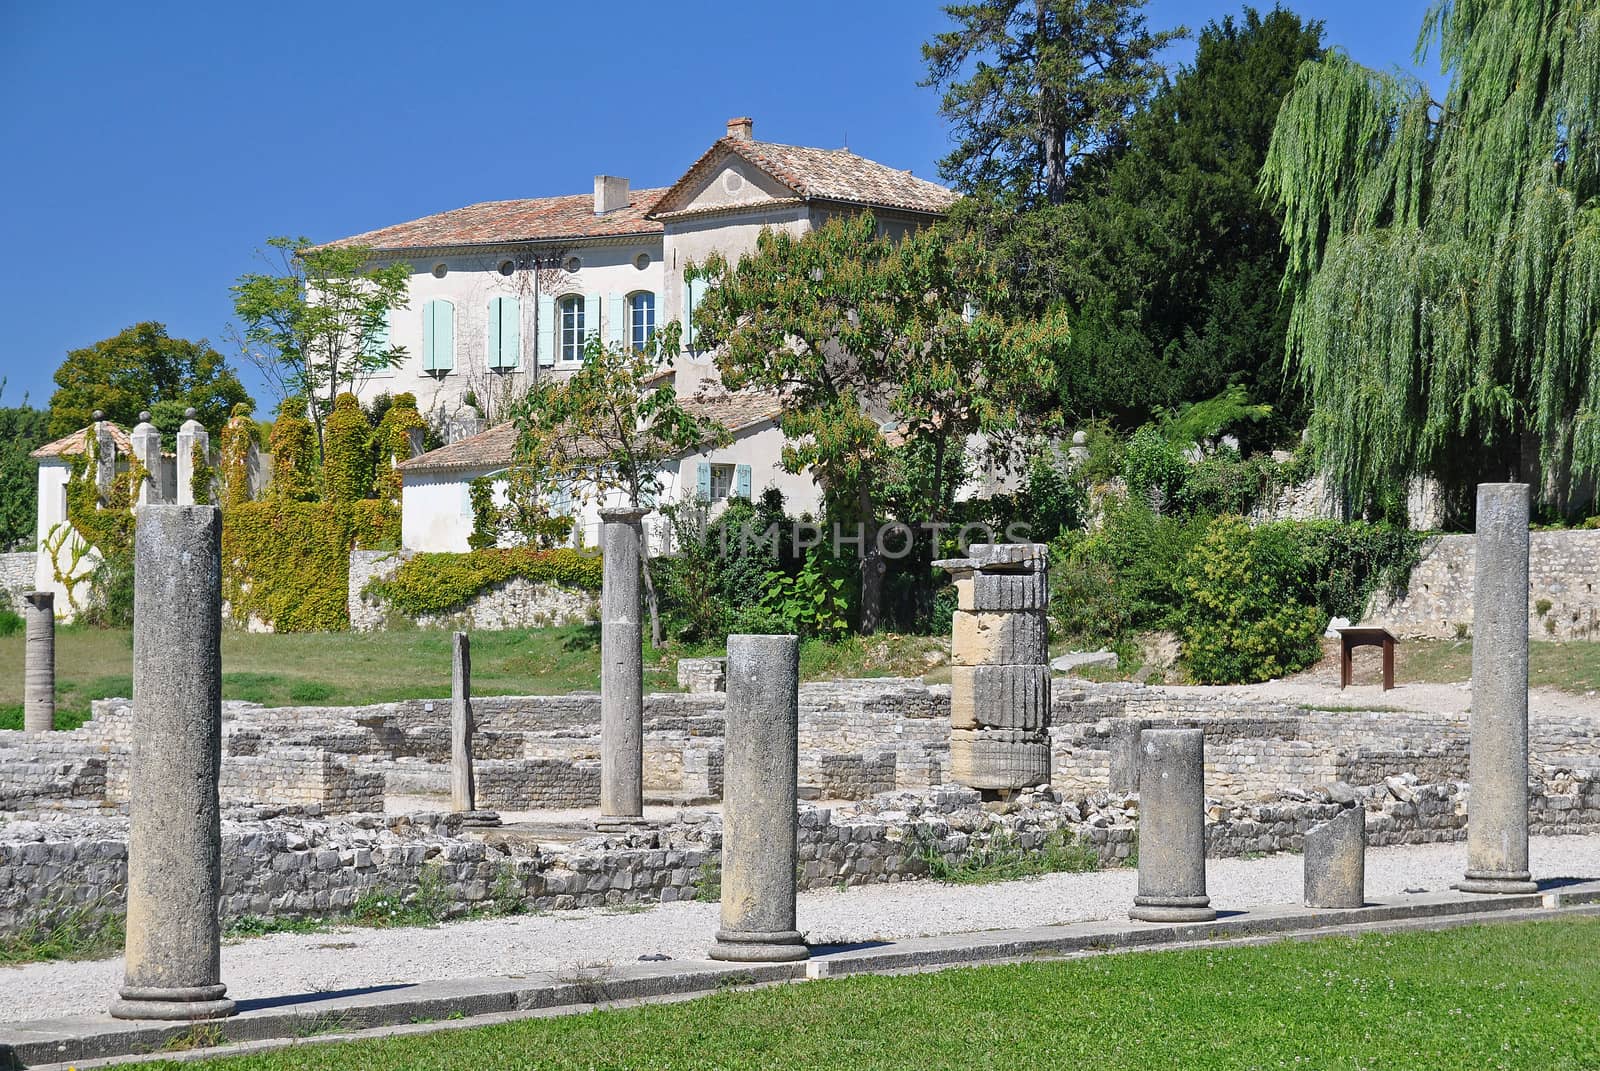 La Villasse, these extensive Roman ruins are at Vaison-La-Romaine, Provence, France. These Gallo-Roman remains are situated in the very centre of the fascinating ancient town of Vaison-La-Romaine. The ruins shown are the Maison au Dauphin (Dolphin House) - a large private house which contained the first private bath in Gaul. 